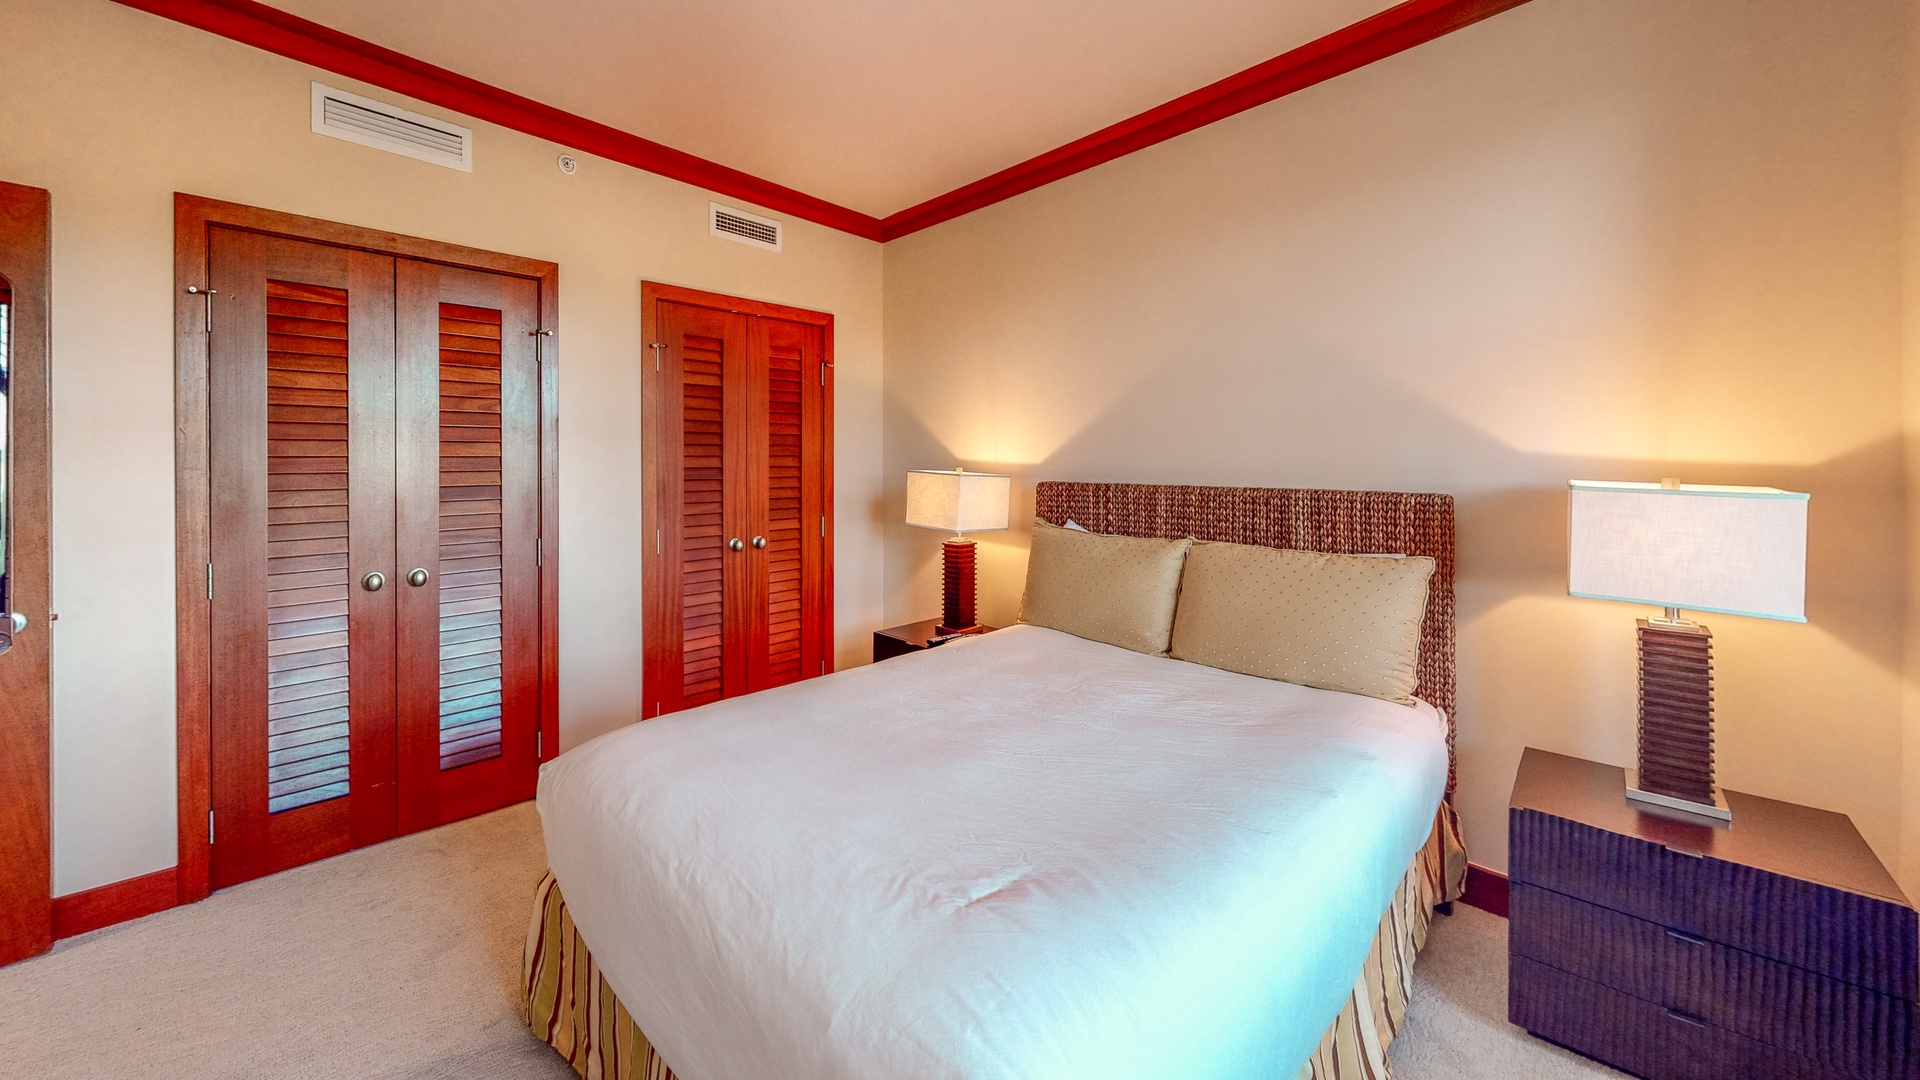 Kapolei Vacation Rentals, Ko Olina Beach Villas O401 - The second guest bedroom with closet space and night stand.